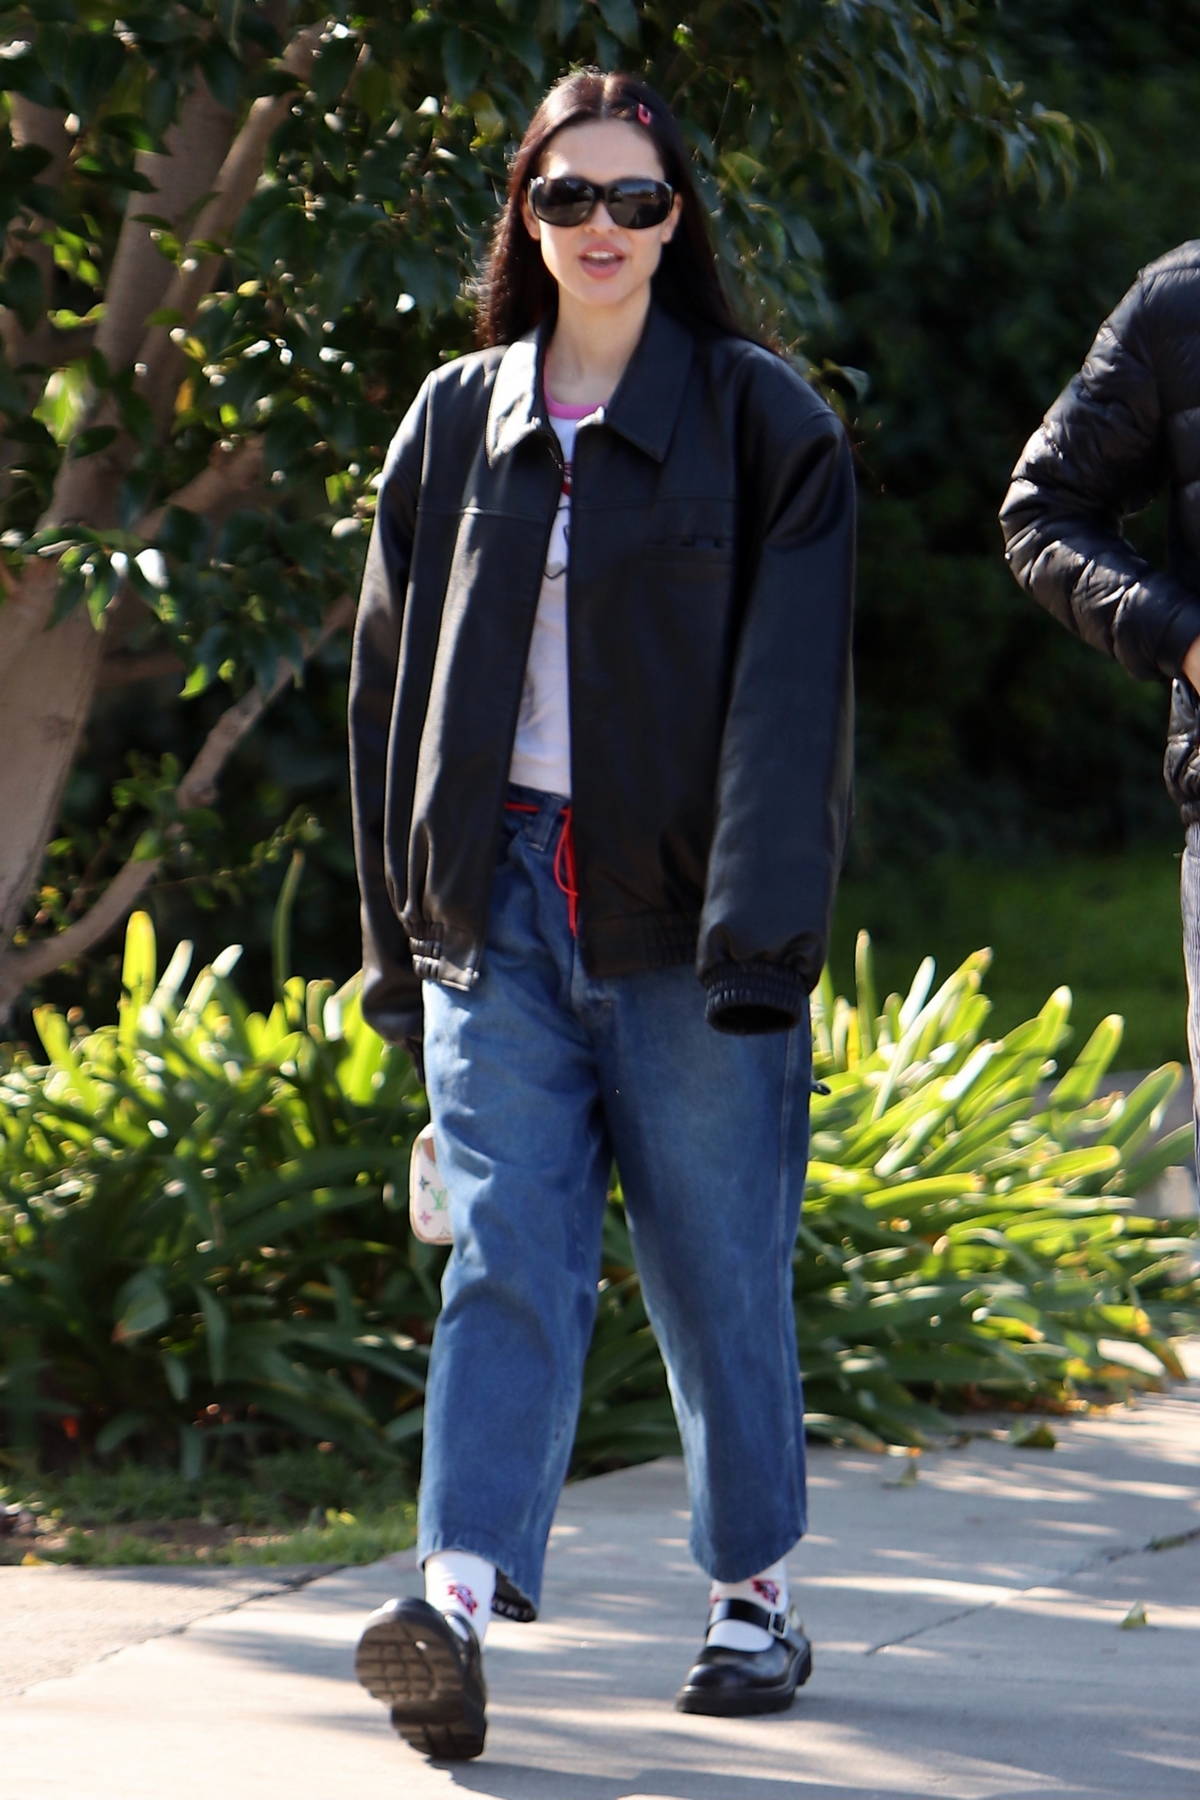 Kendall Jenner wears a knitted blue cardigan with a white top and